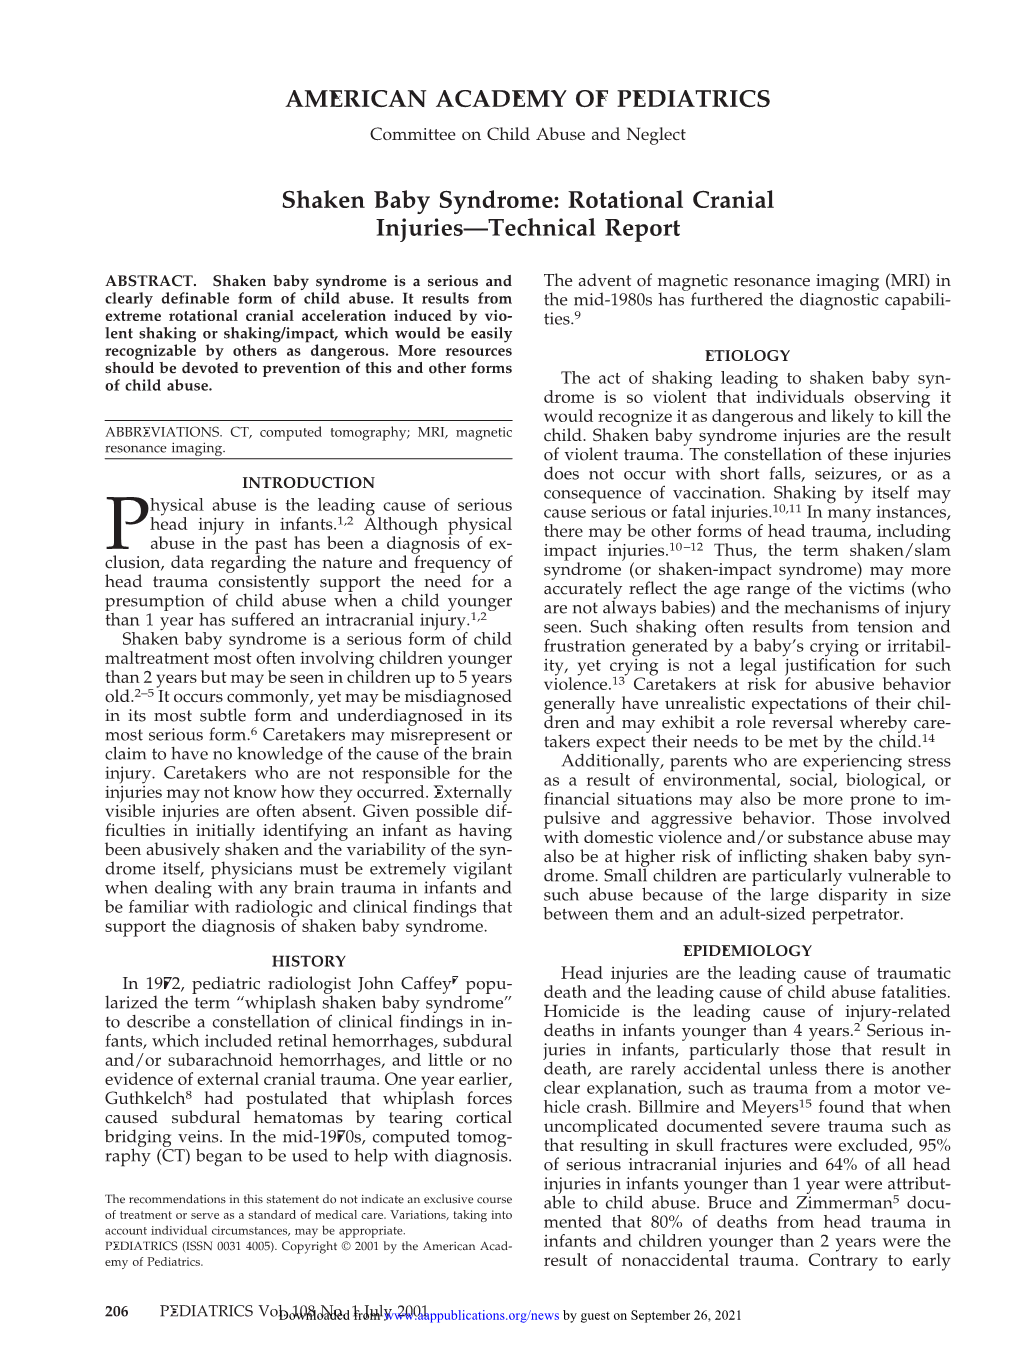 Shaken Baby Syndrome: Rotational Cranial Injuries—Technical Report